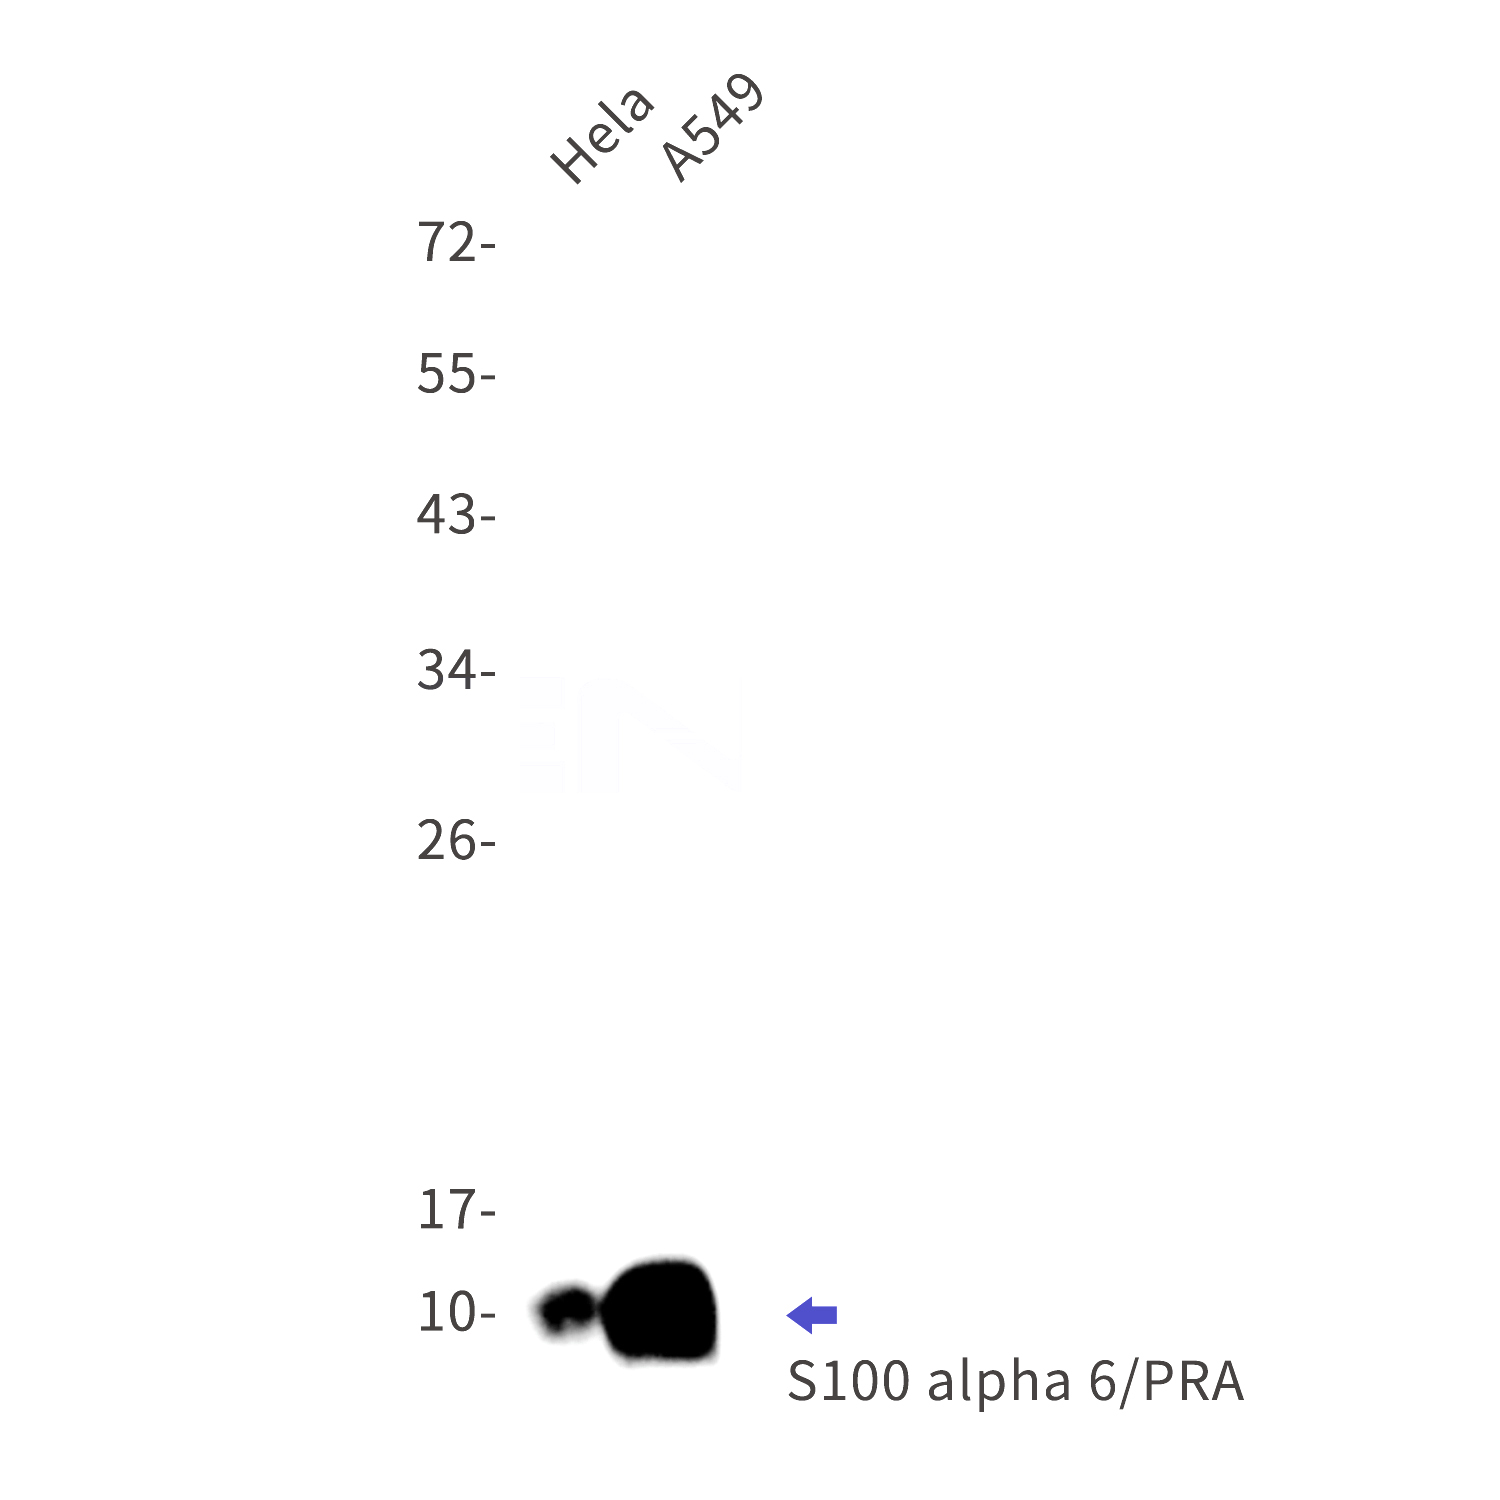 Western blot detection of S100 alpha 6/PRA in Hela,A549 cell lysates using S100 alpha 6/PRA Rabbit mAb(1:1000 diluted).Predicted band size:10kDa.Observed band size:10kDa.